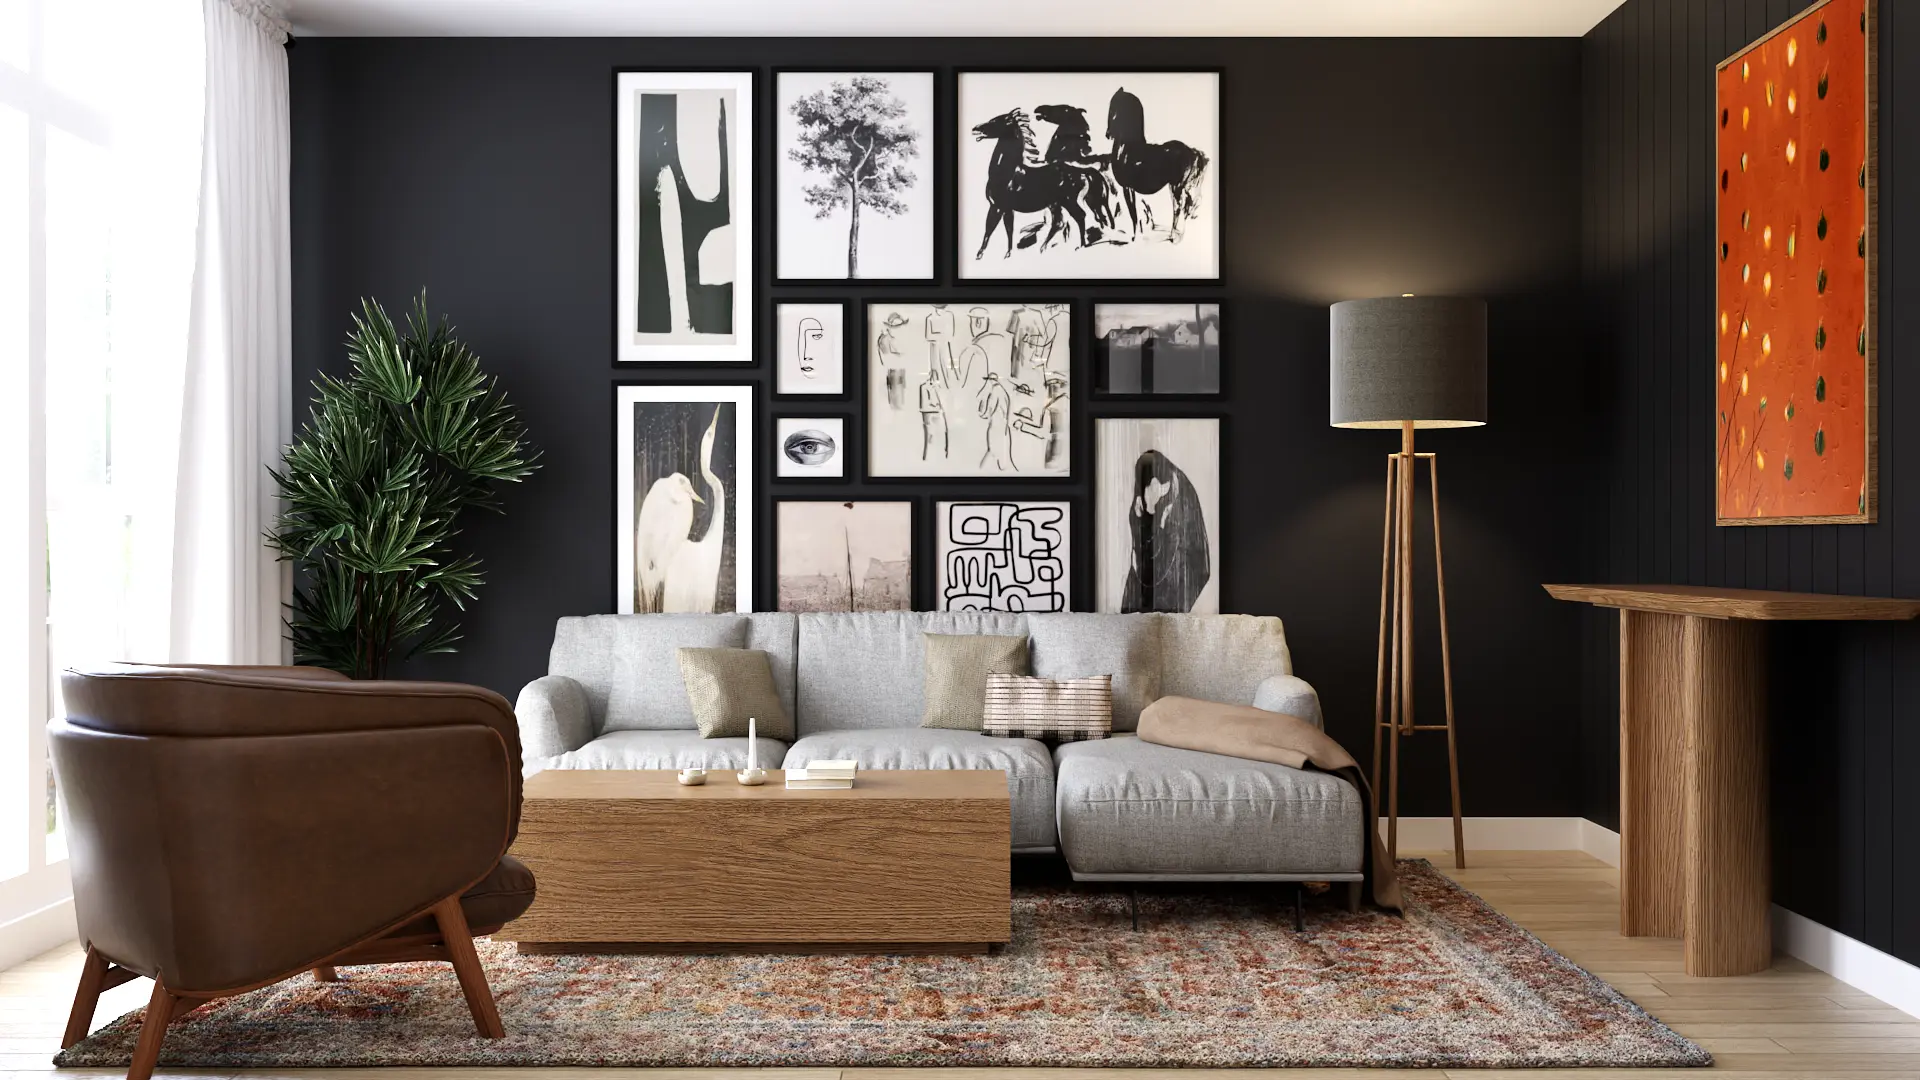 Art-filled living room with a diverse gallery wall and contemporary furnishings, designed by Debora, an online interior design service based in New York City.